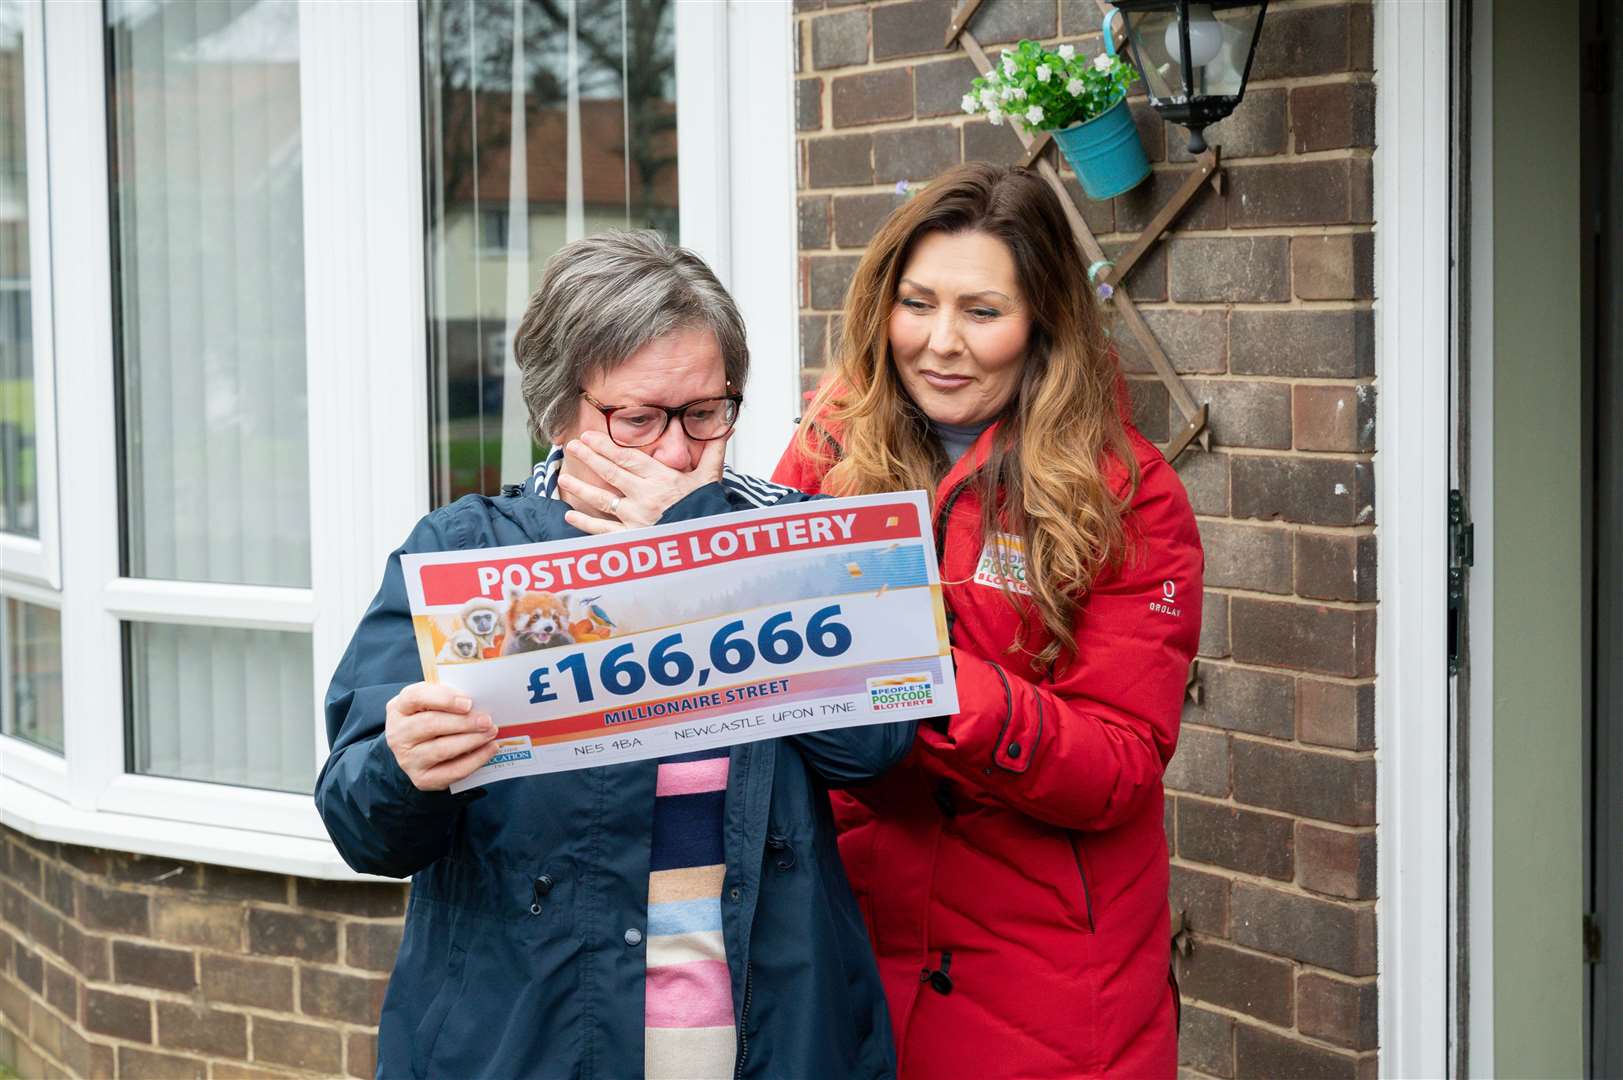 Christine Hedley said she ‘couldn’t believe it’ when she opened the envelope to reveal two winning tickets (People’s Postcode Lottery/PA)